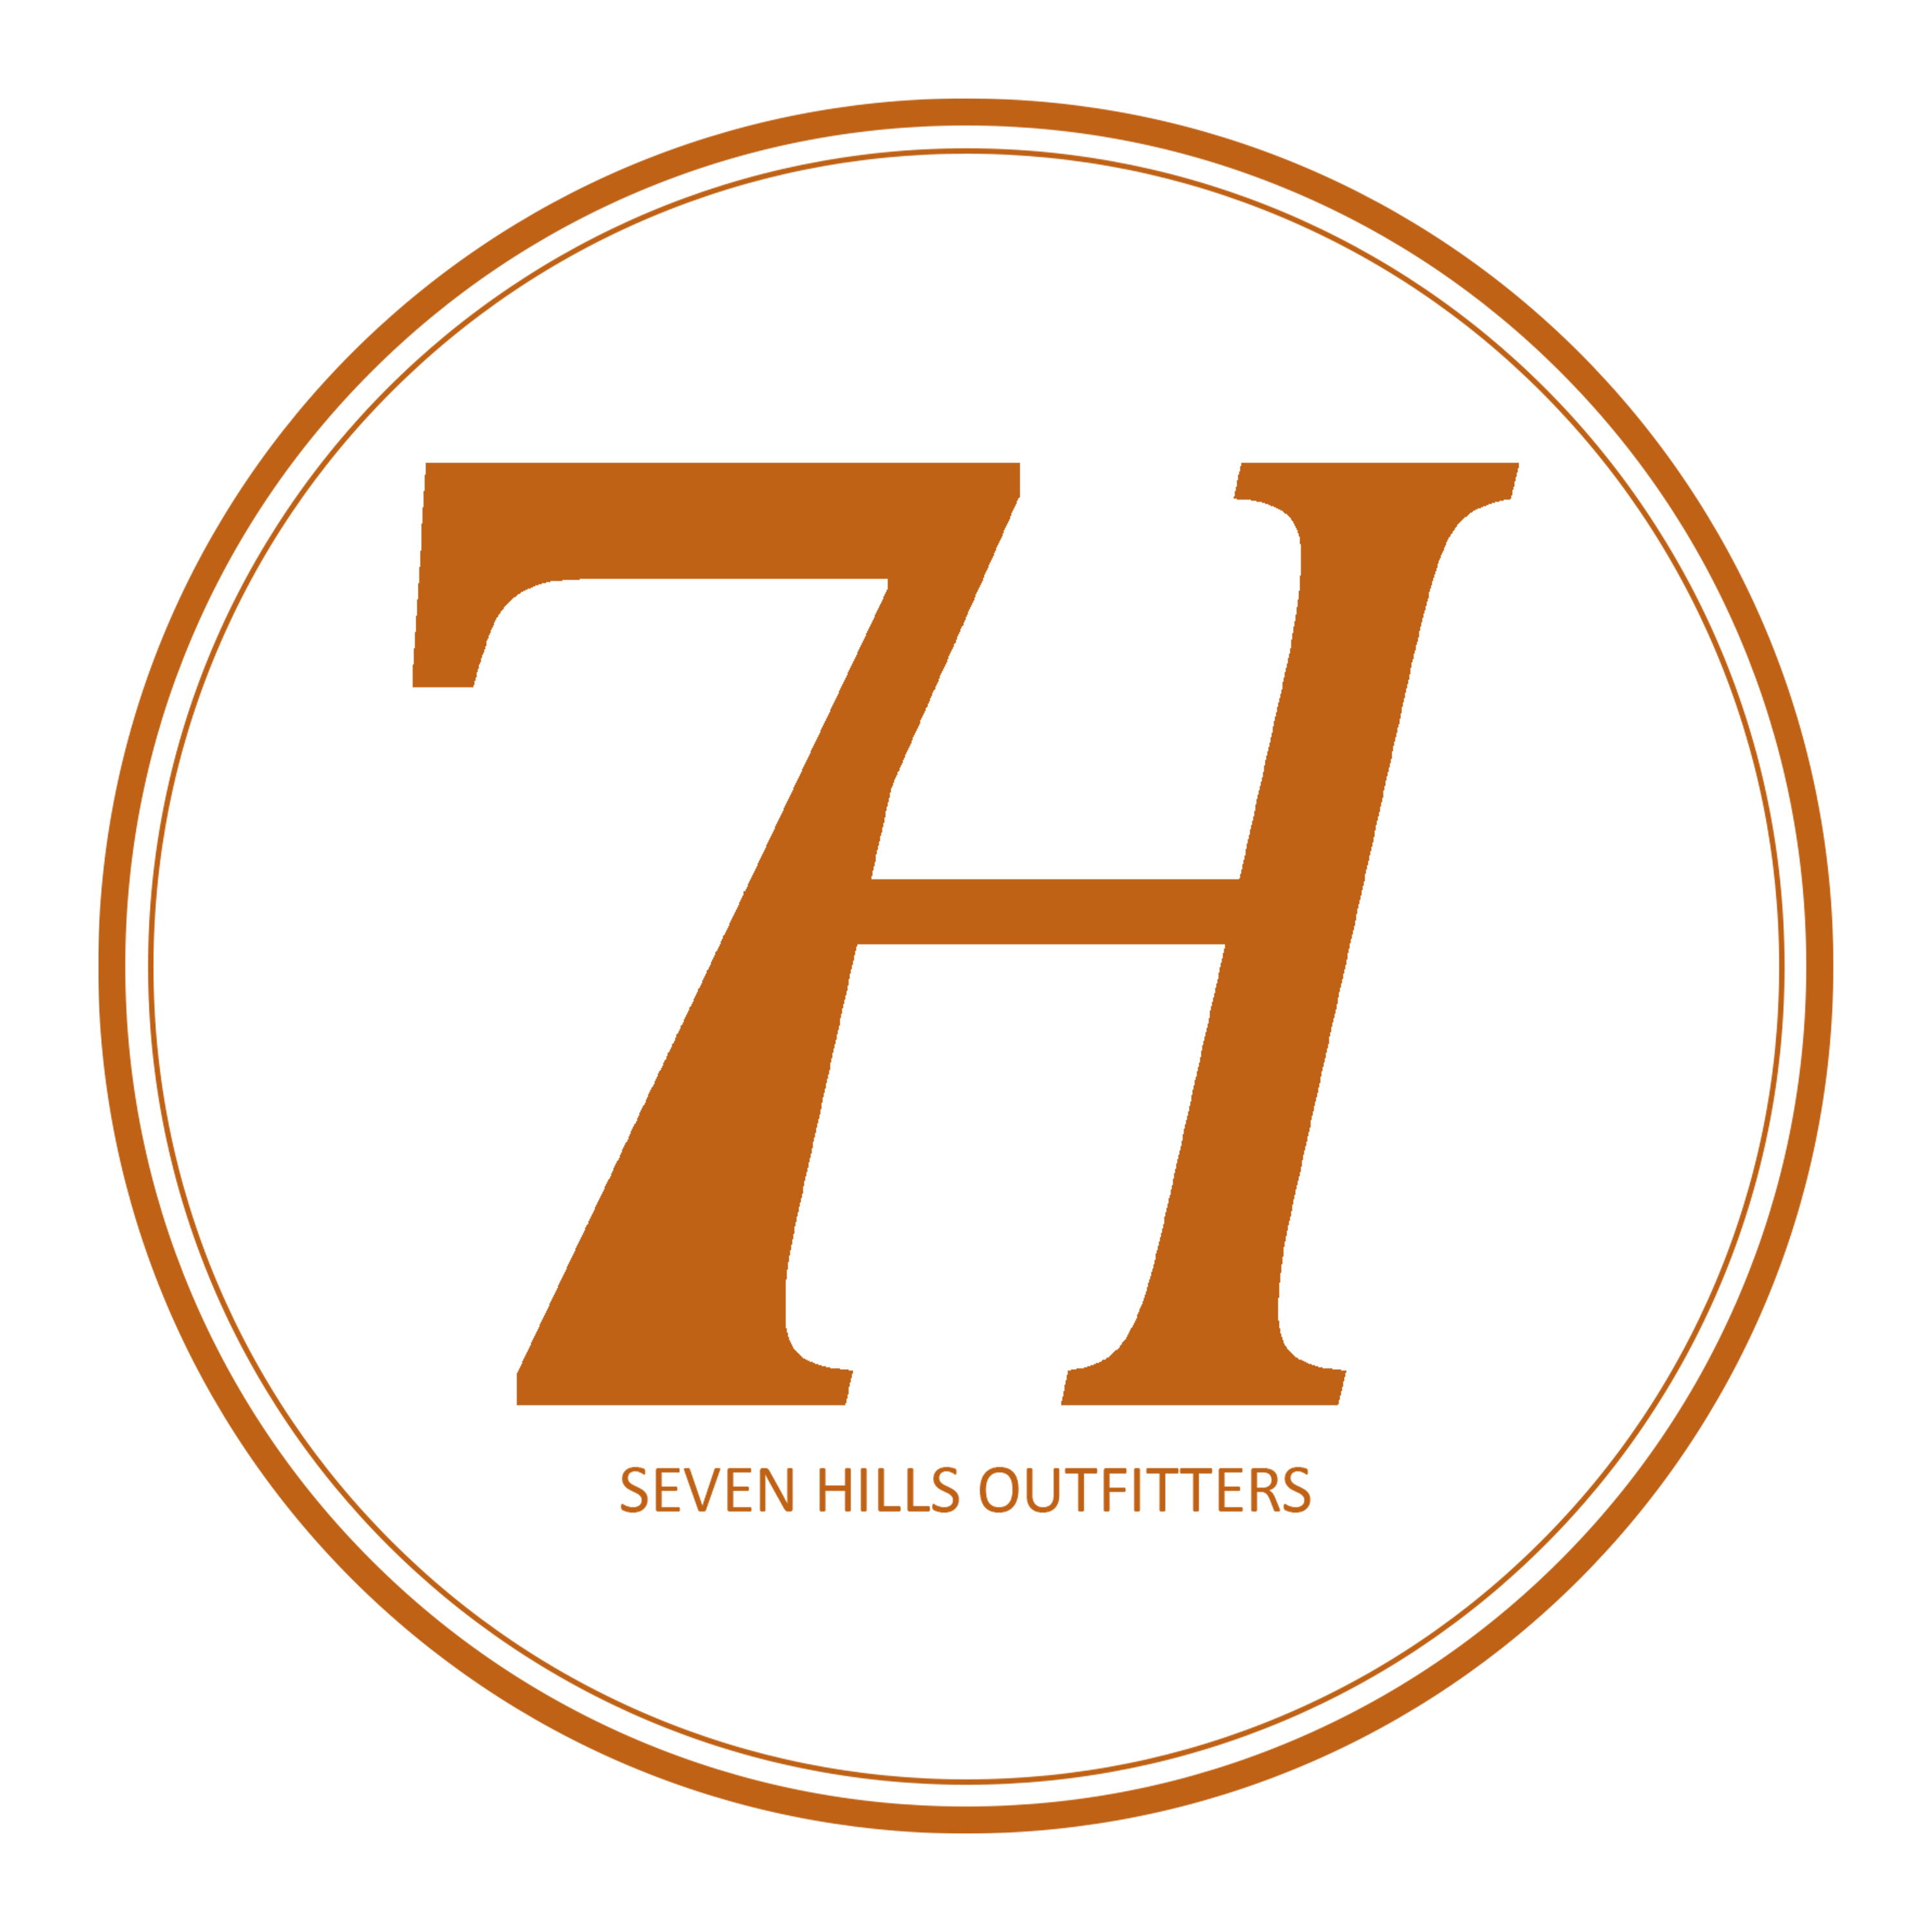 Seven Hills Outfitters